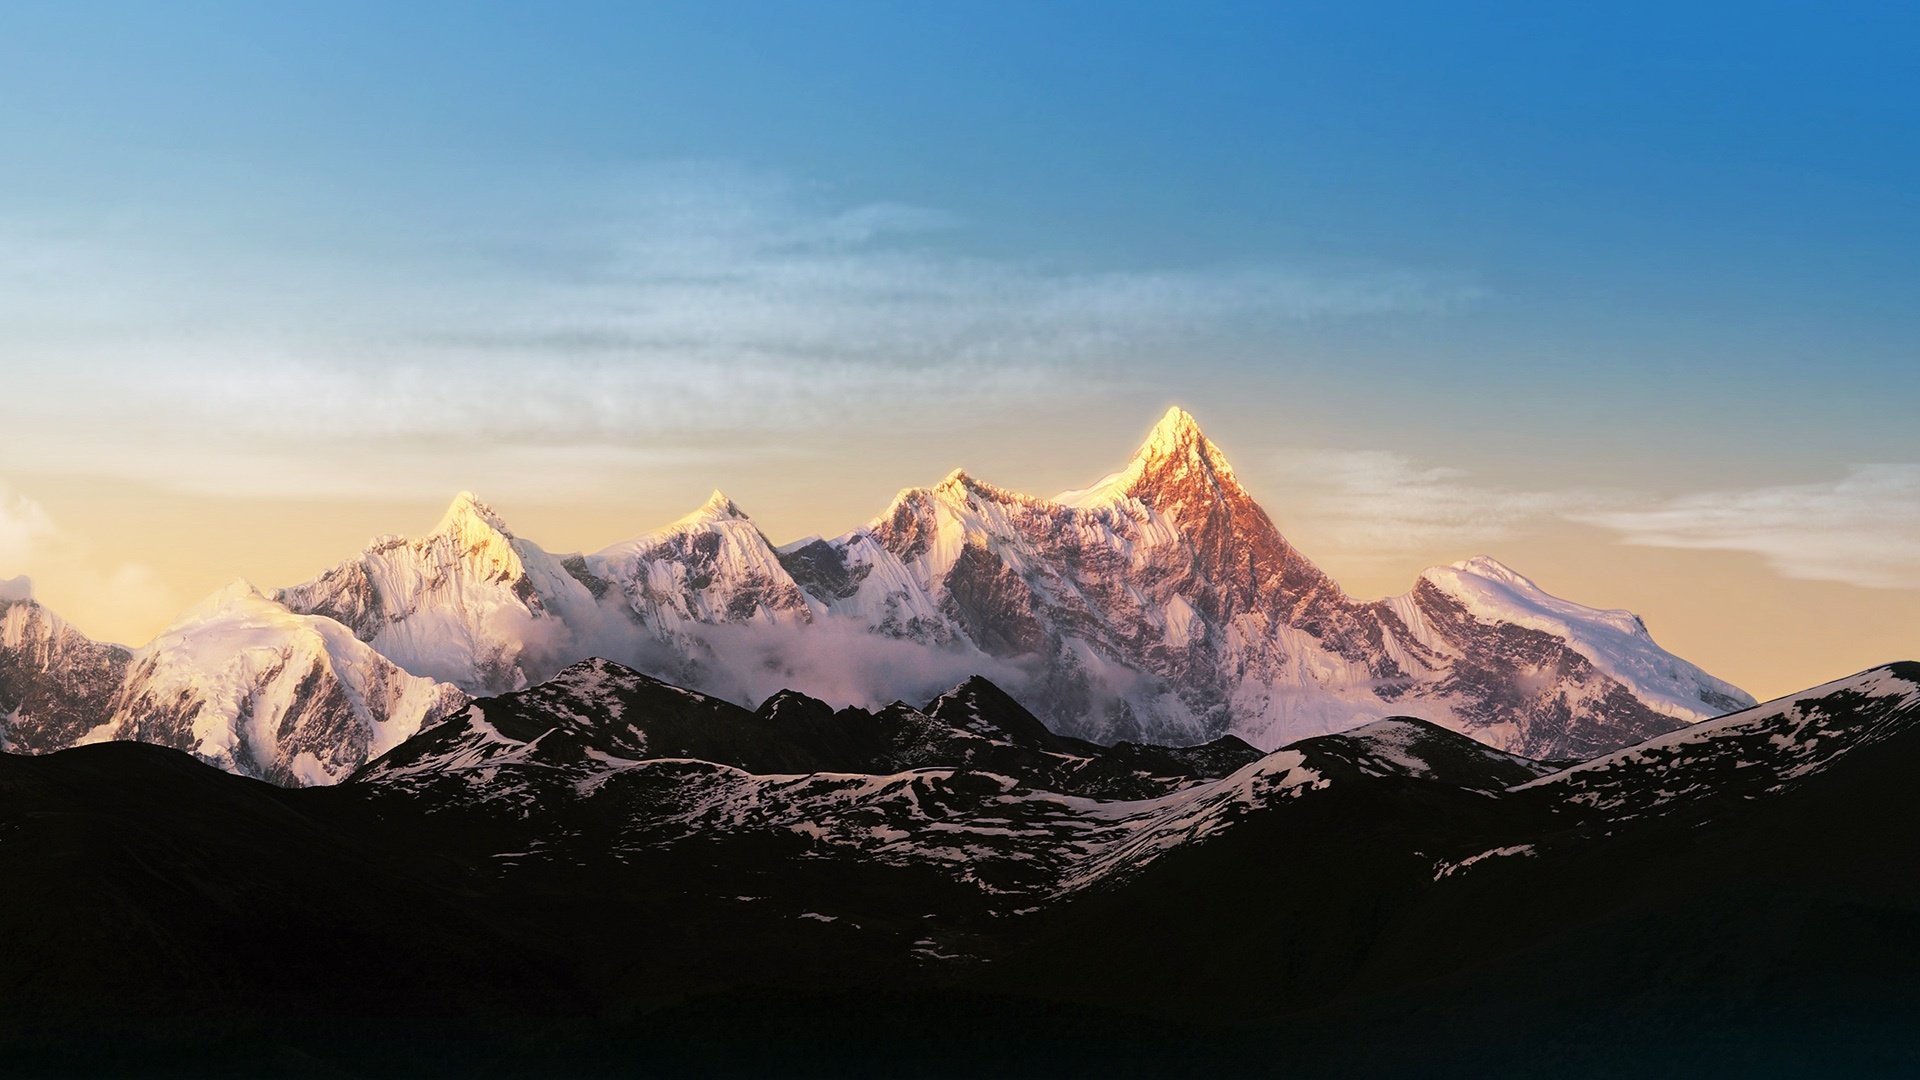 General 1920x1080 landscape mountains snowy mountain nature snowy peak Himalayas